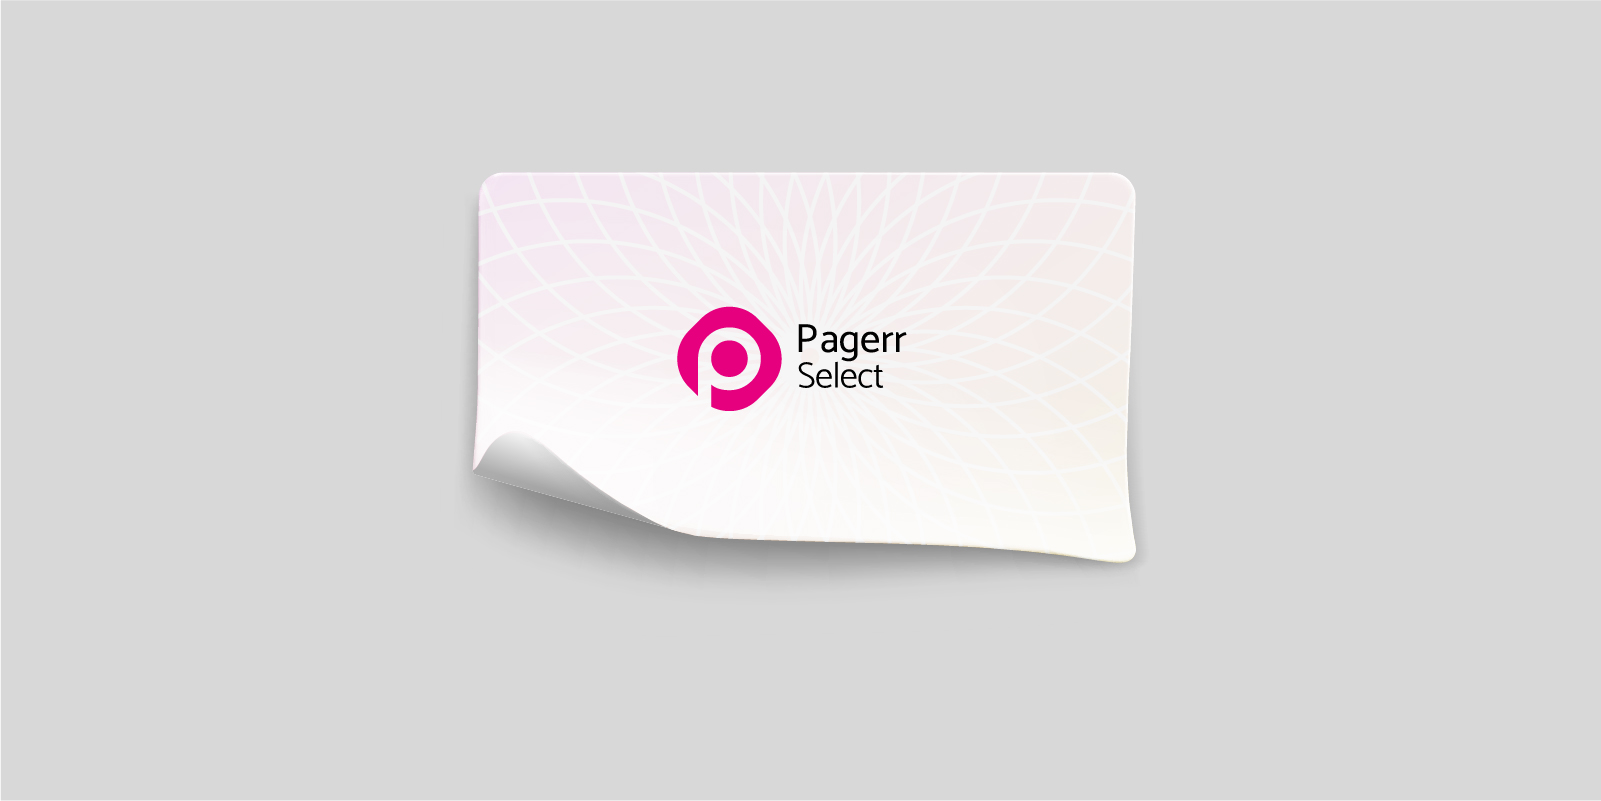 Sheet stickers in Bucharest - Print with Pagerr